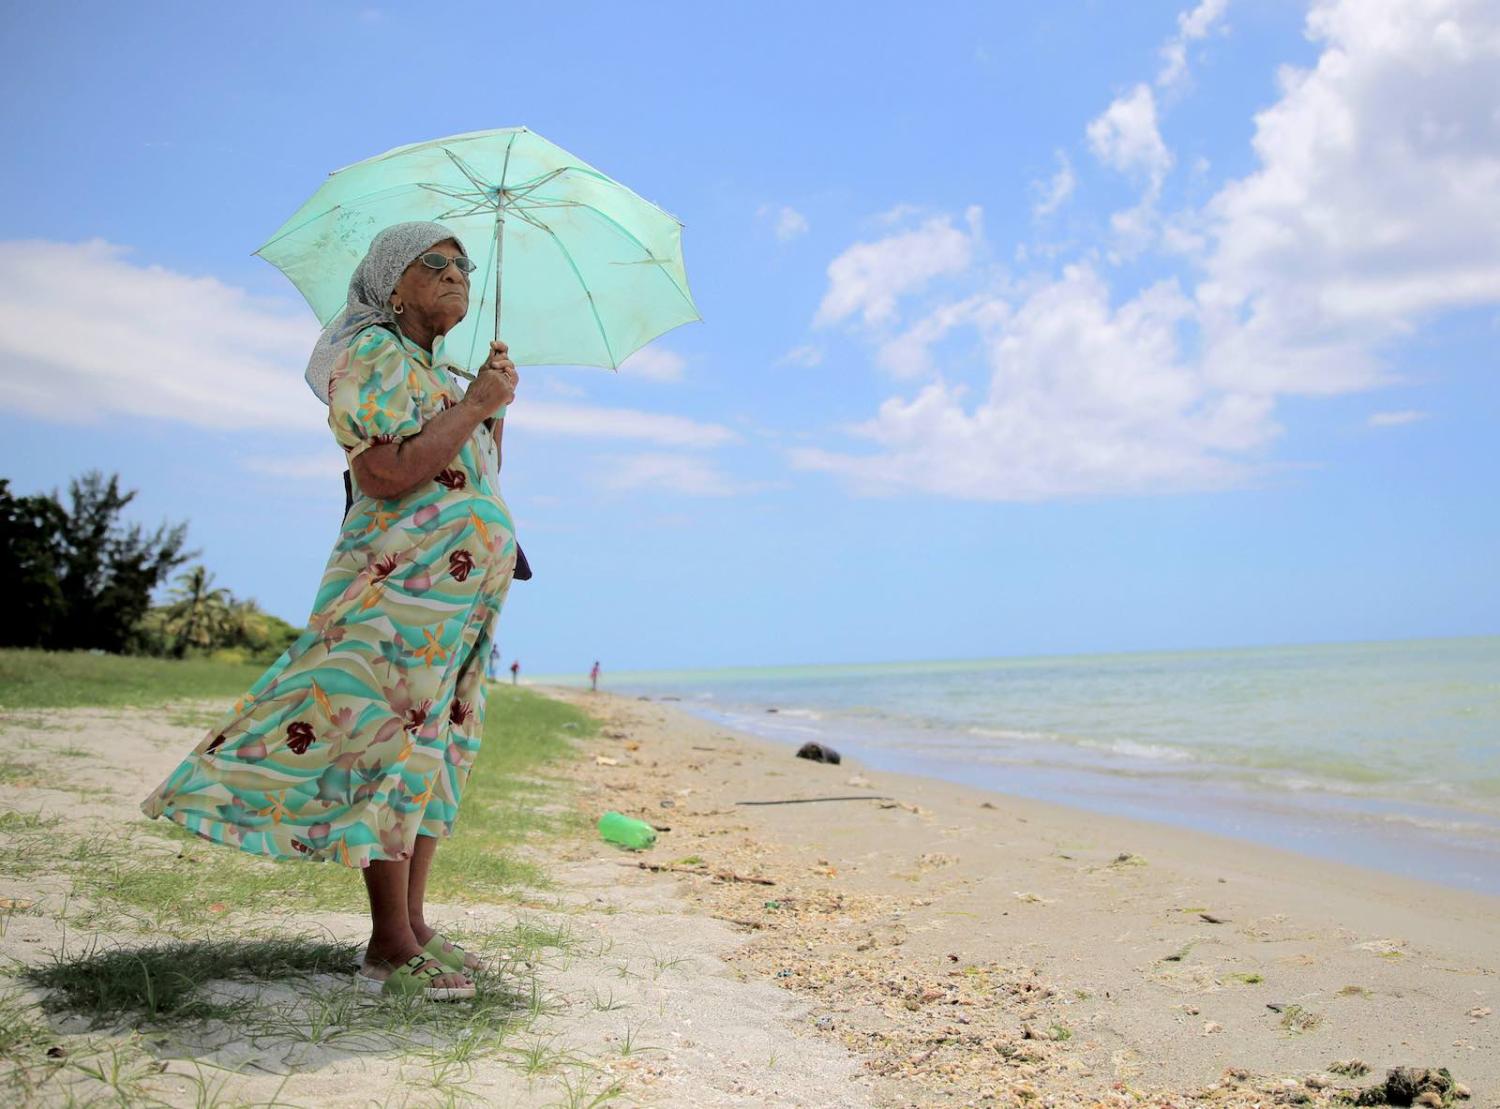 A 90-year-old woman who was exiled from the Peros Banhos Atoll of the Chagos Archipelago stands by the sea in March 2015 in Port Louis, Mauritius (The Asahi Shimbun via Getty Images)